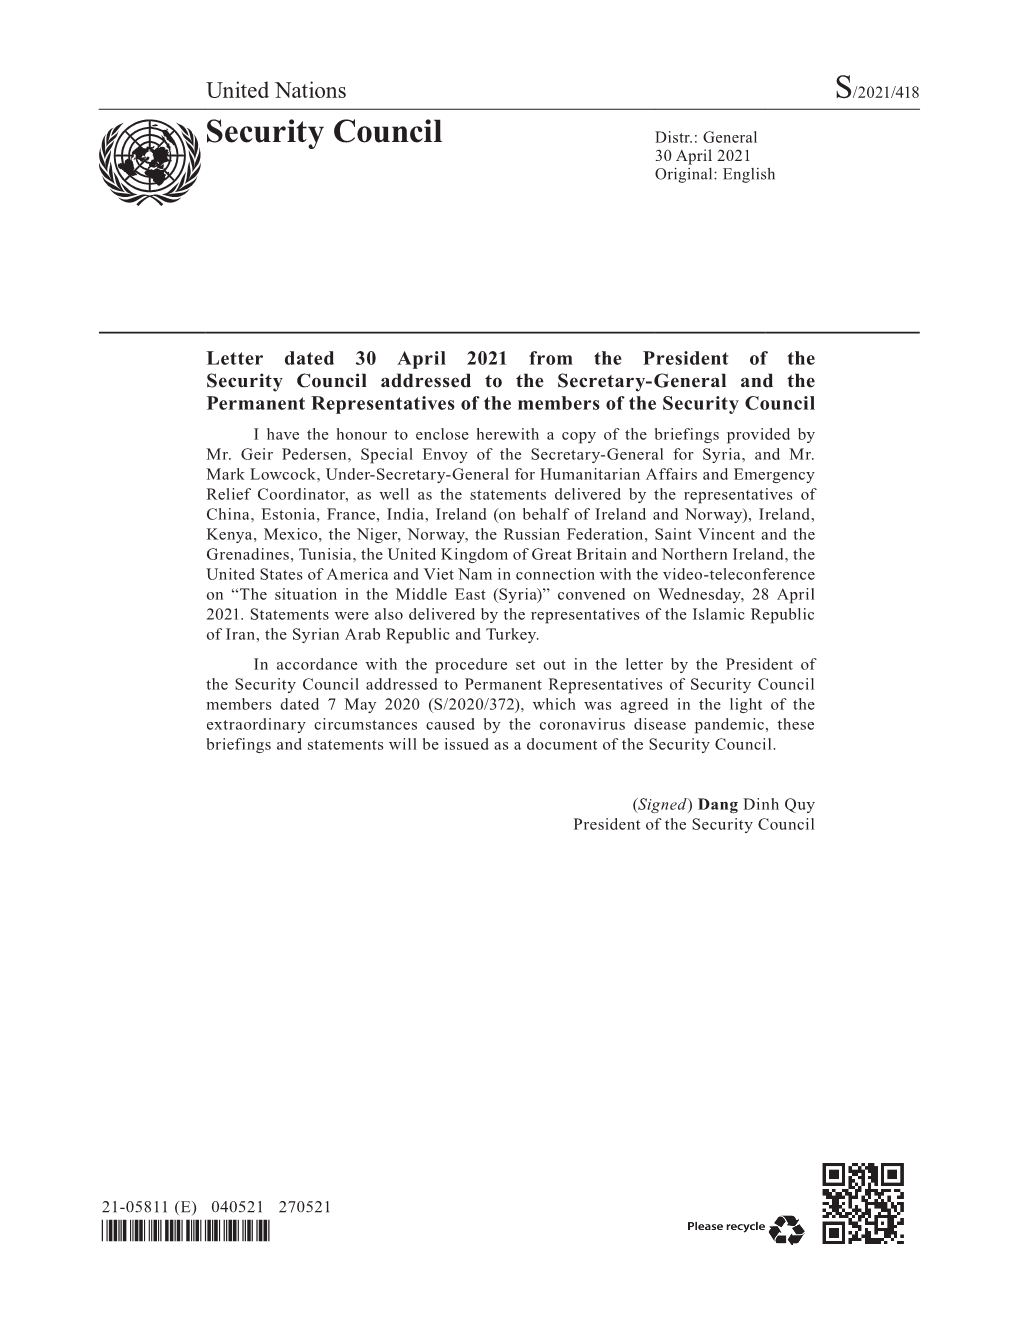 Letter Dated 30 April 2021 from the President of the Security Council